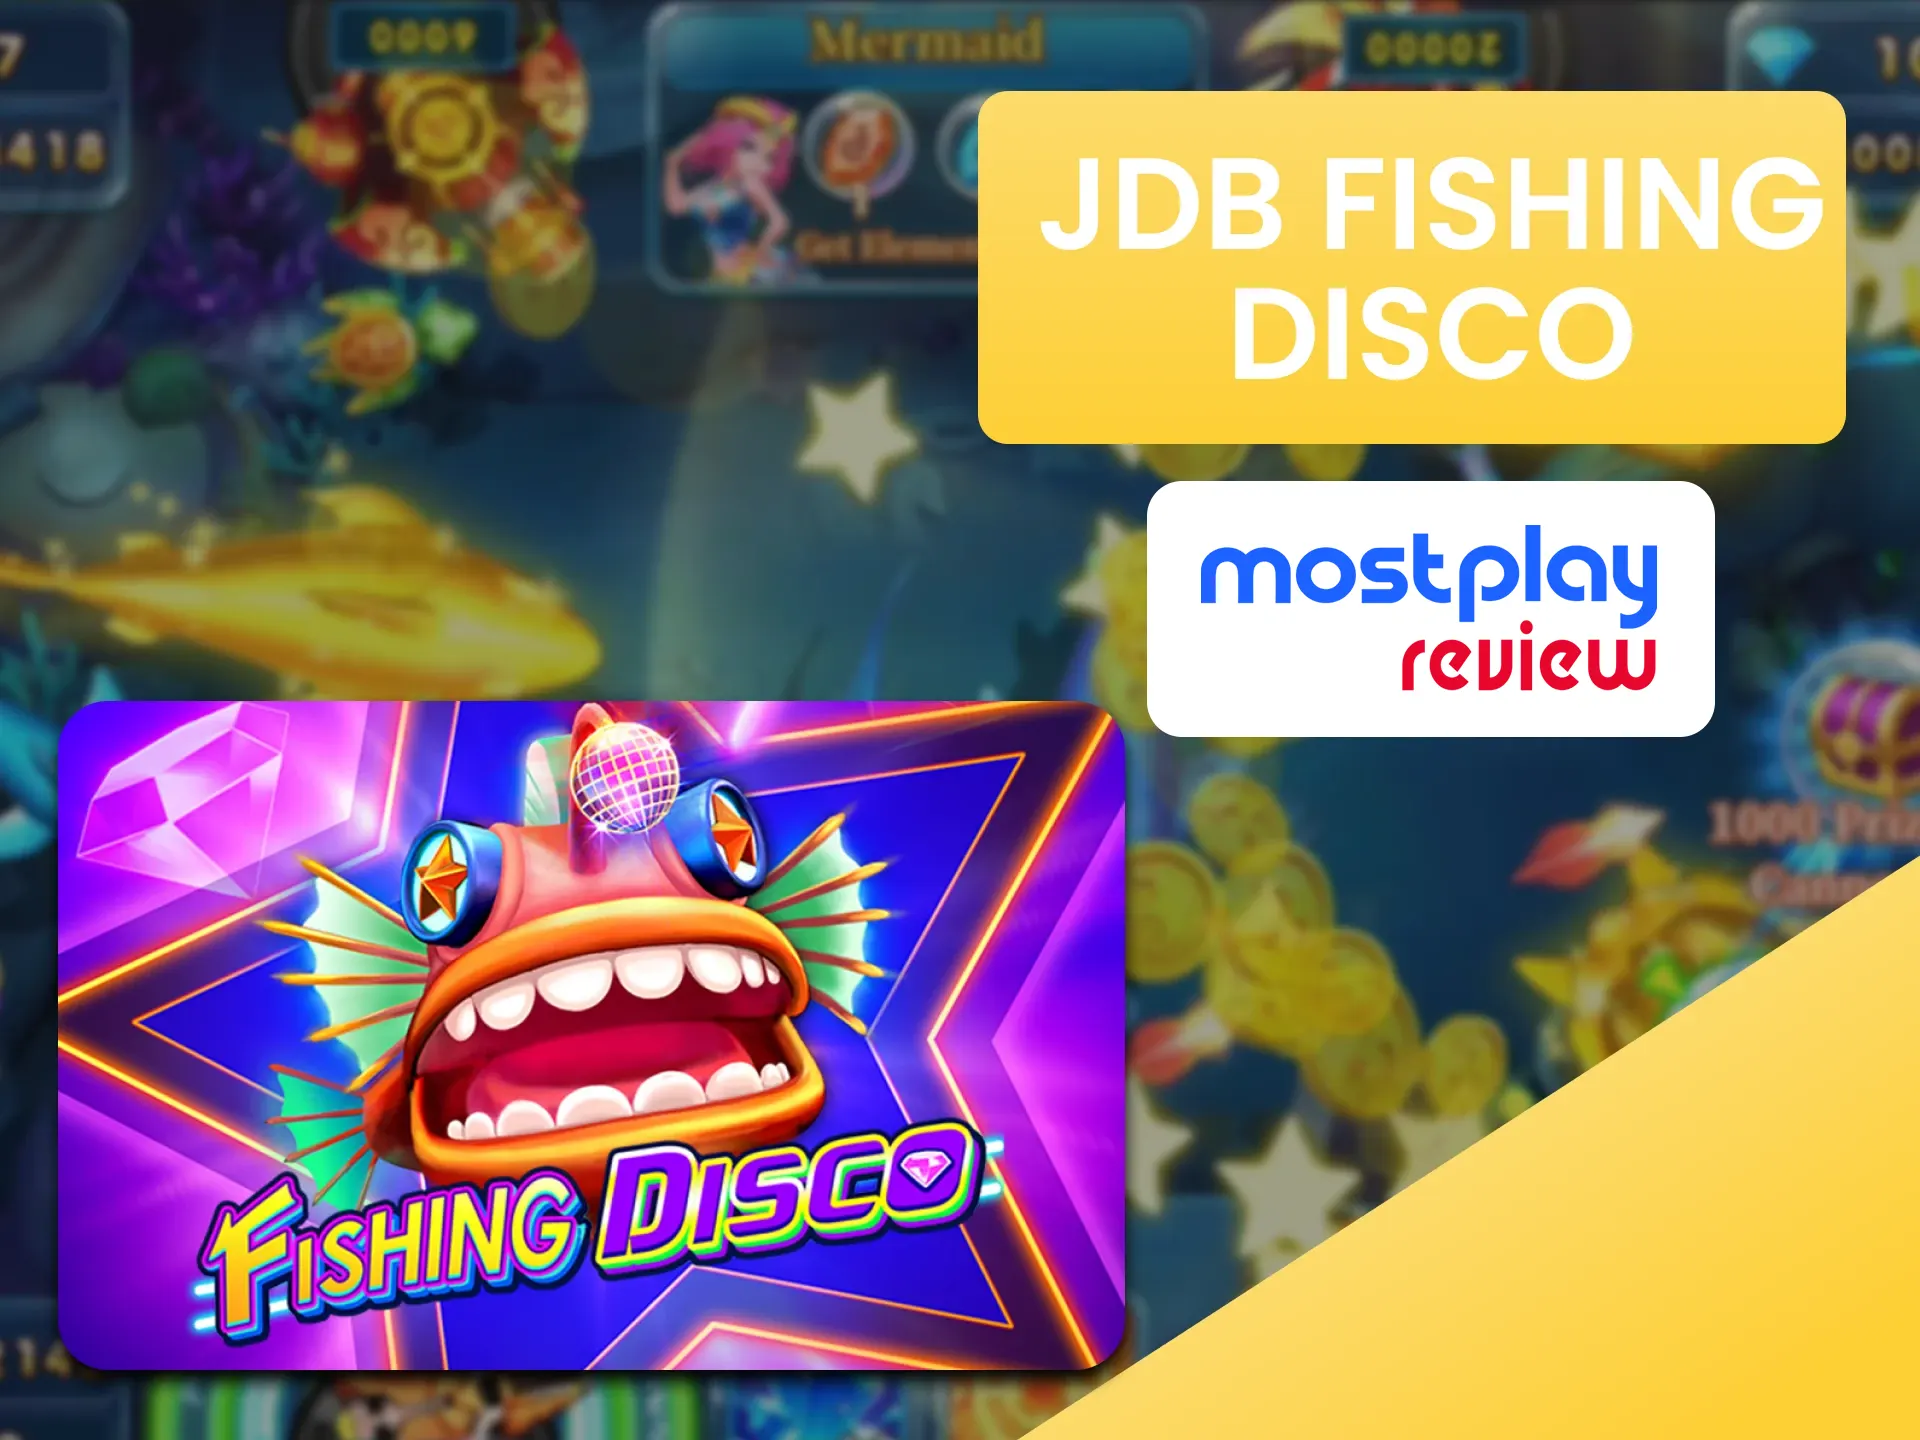 Have fun by playing the Fishing Disco game at the Mostplay.